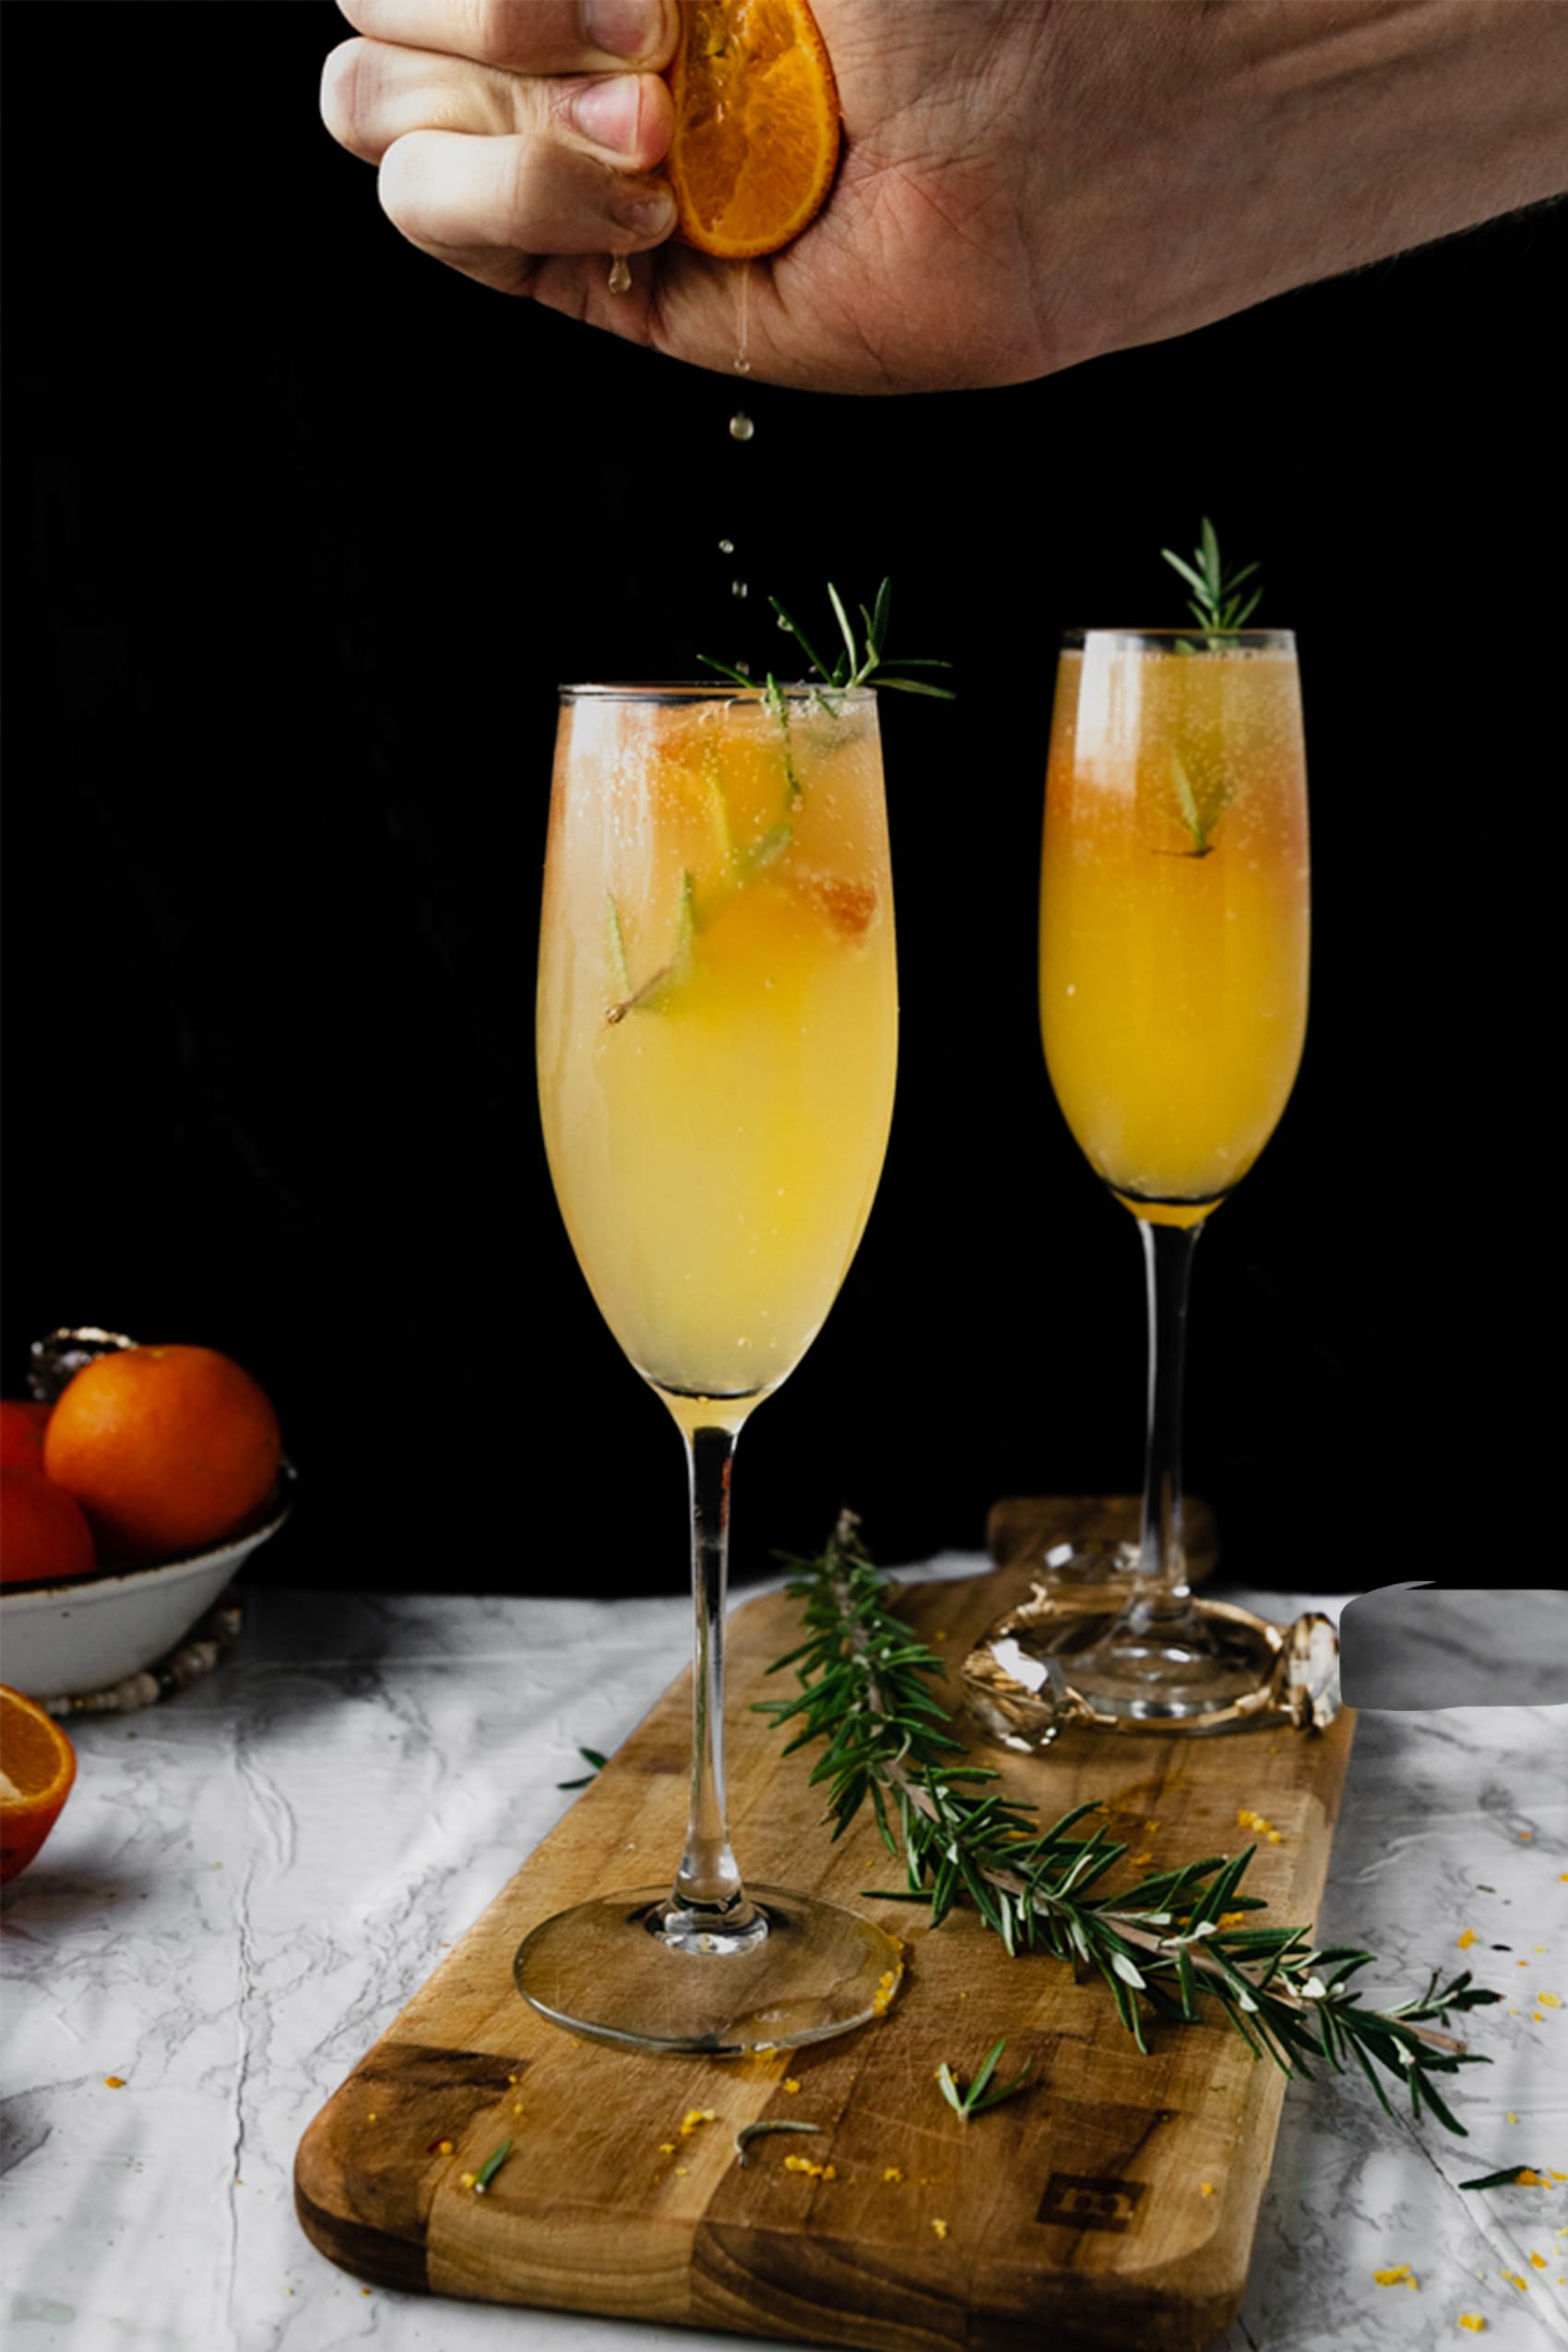 The Best Orange Juice and Champagne for Mimosas